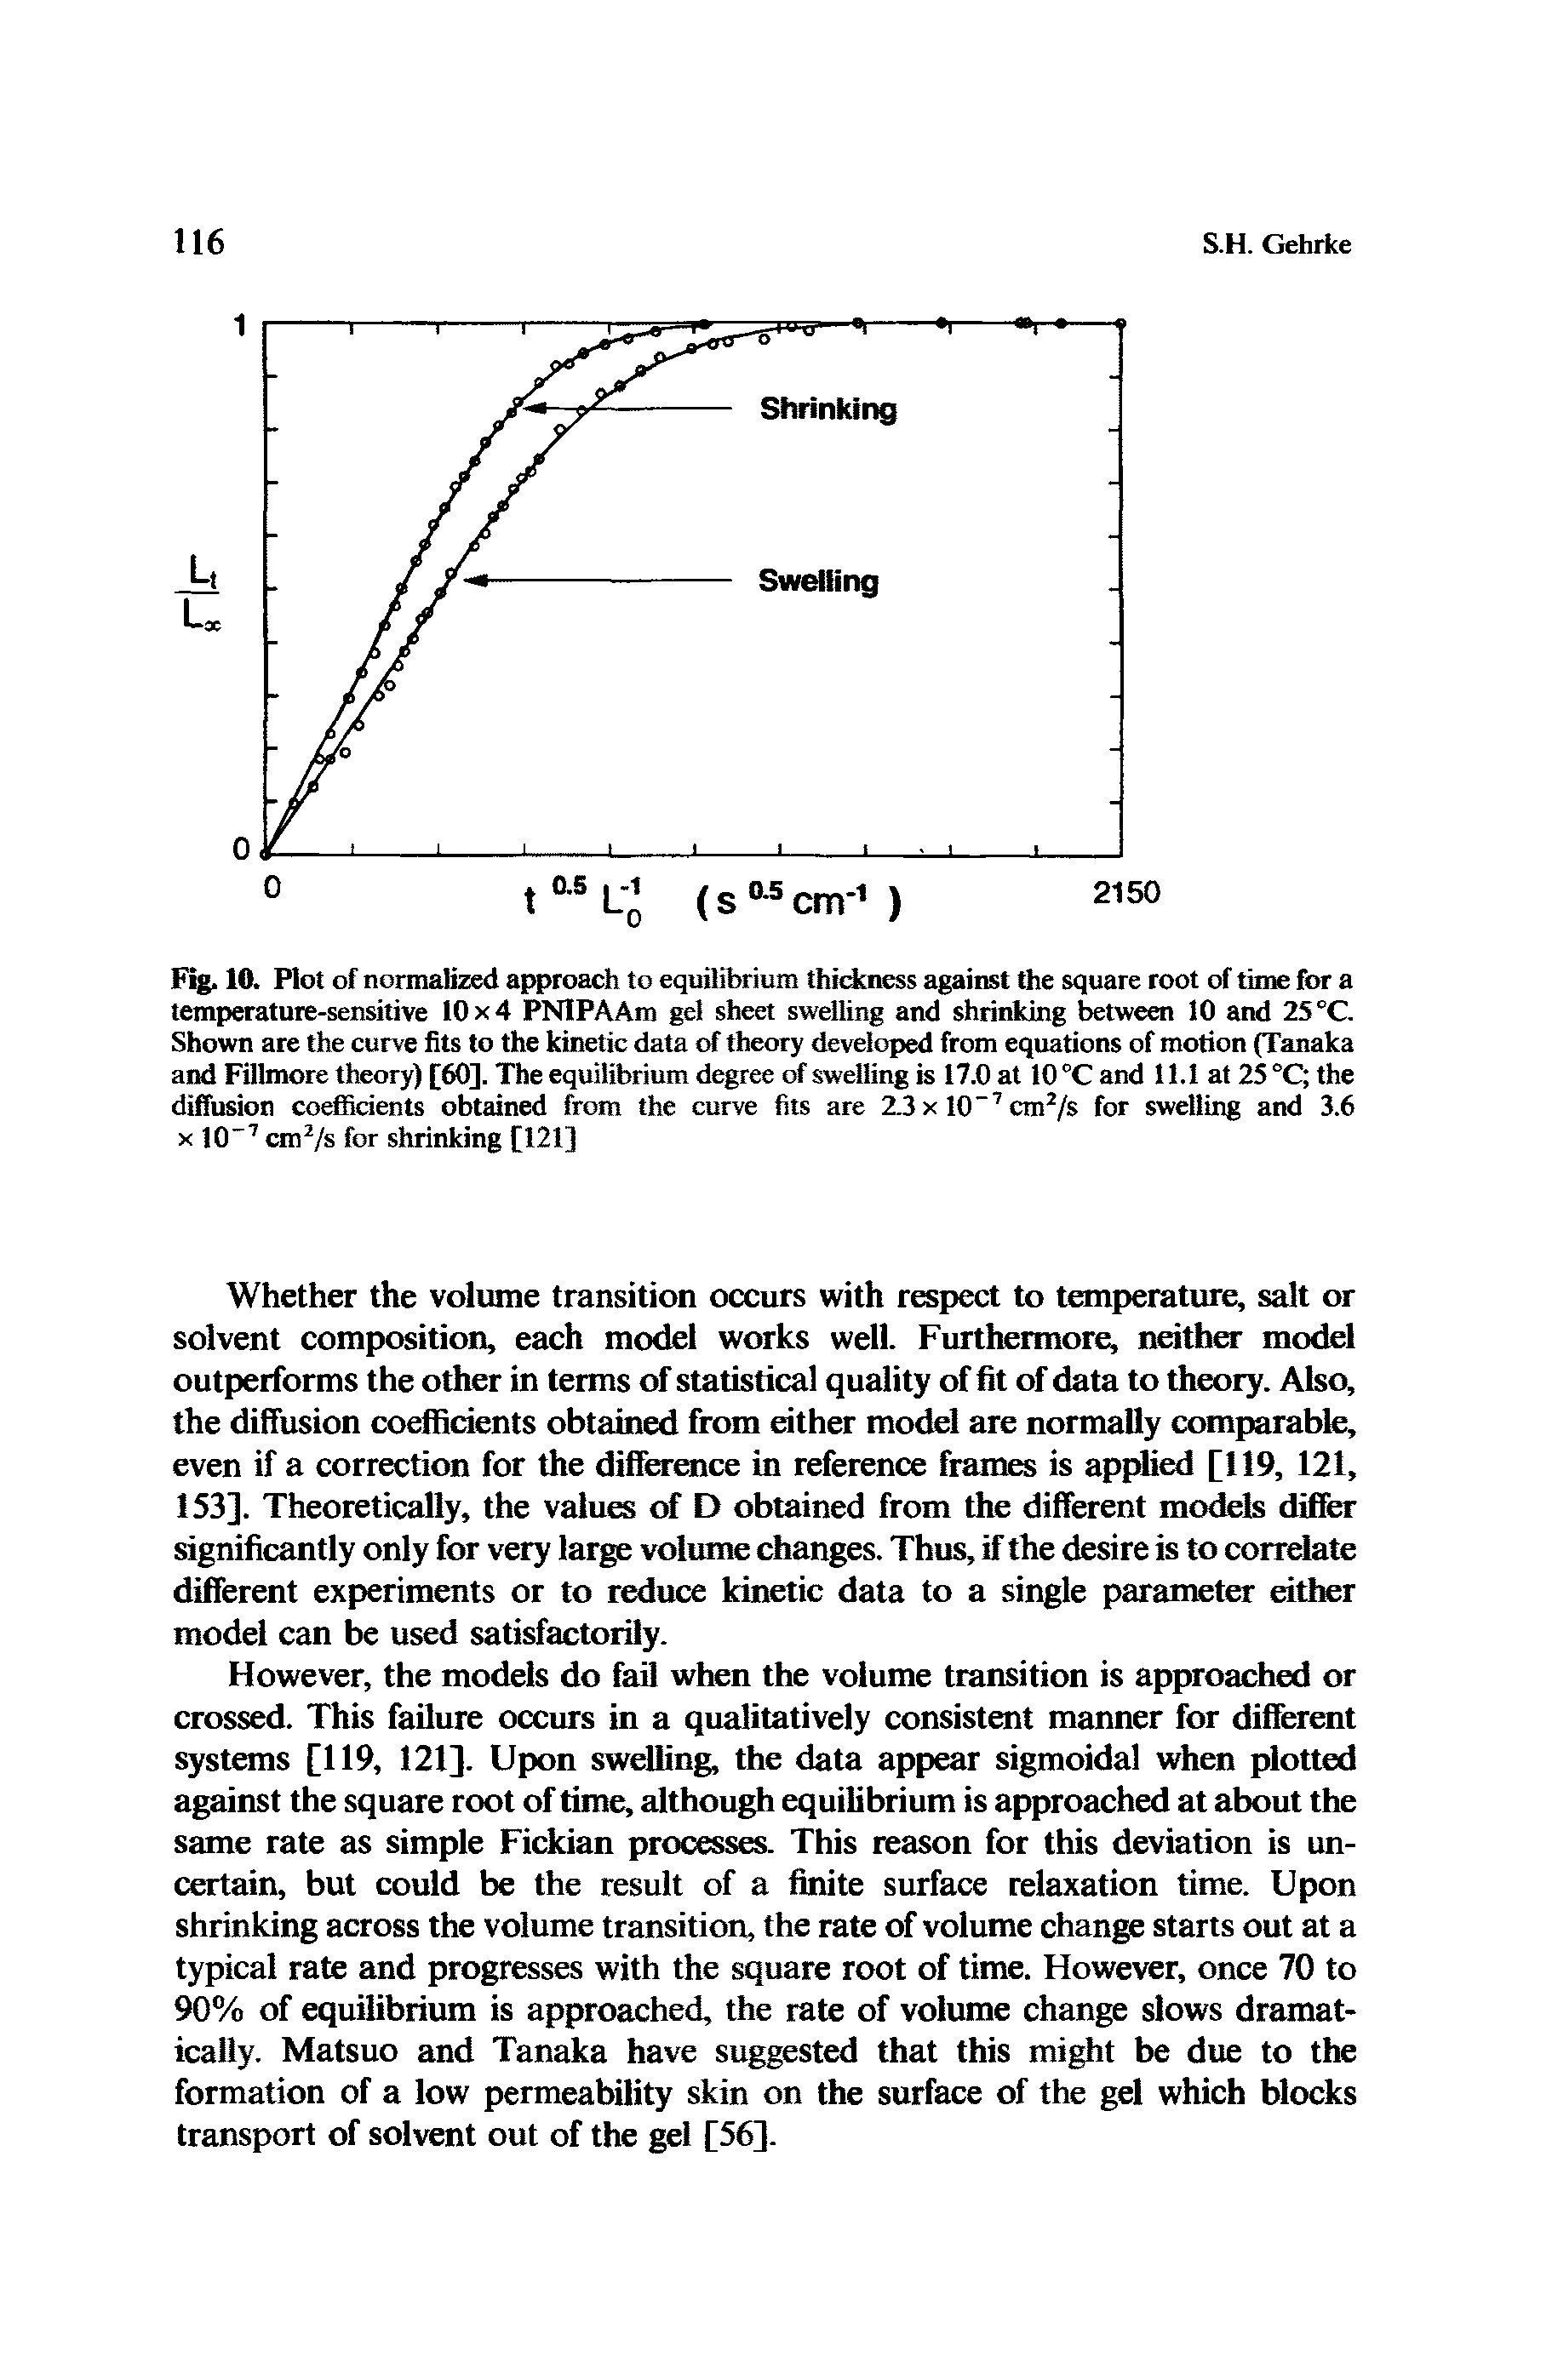 Fig. 10. Plot of normalized approach to equilibrium thickness against the square root of time for a temperature-sensitive 10x4 PNIPAAm gel sheet swelling and shrinking between 10 and 25 °C. Shown are the curve fits to the kinetic data of theory developed from equations of motion (Tanaka and Fillmore theory) [60]. The equilibrium degree of swelling is 17.0 at 10°Cand 11.1 at 25 °C the diffusion coefficients obtained from the curve fits are 2.3 x 10"7 ctn2/s for swelling and 3.6 x 10 7 cm2/s for shrinking [121]...